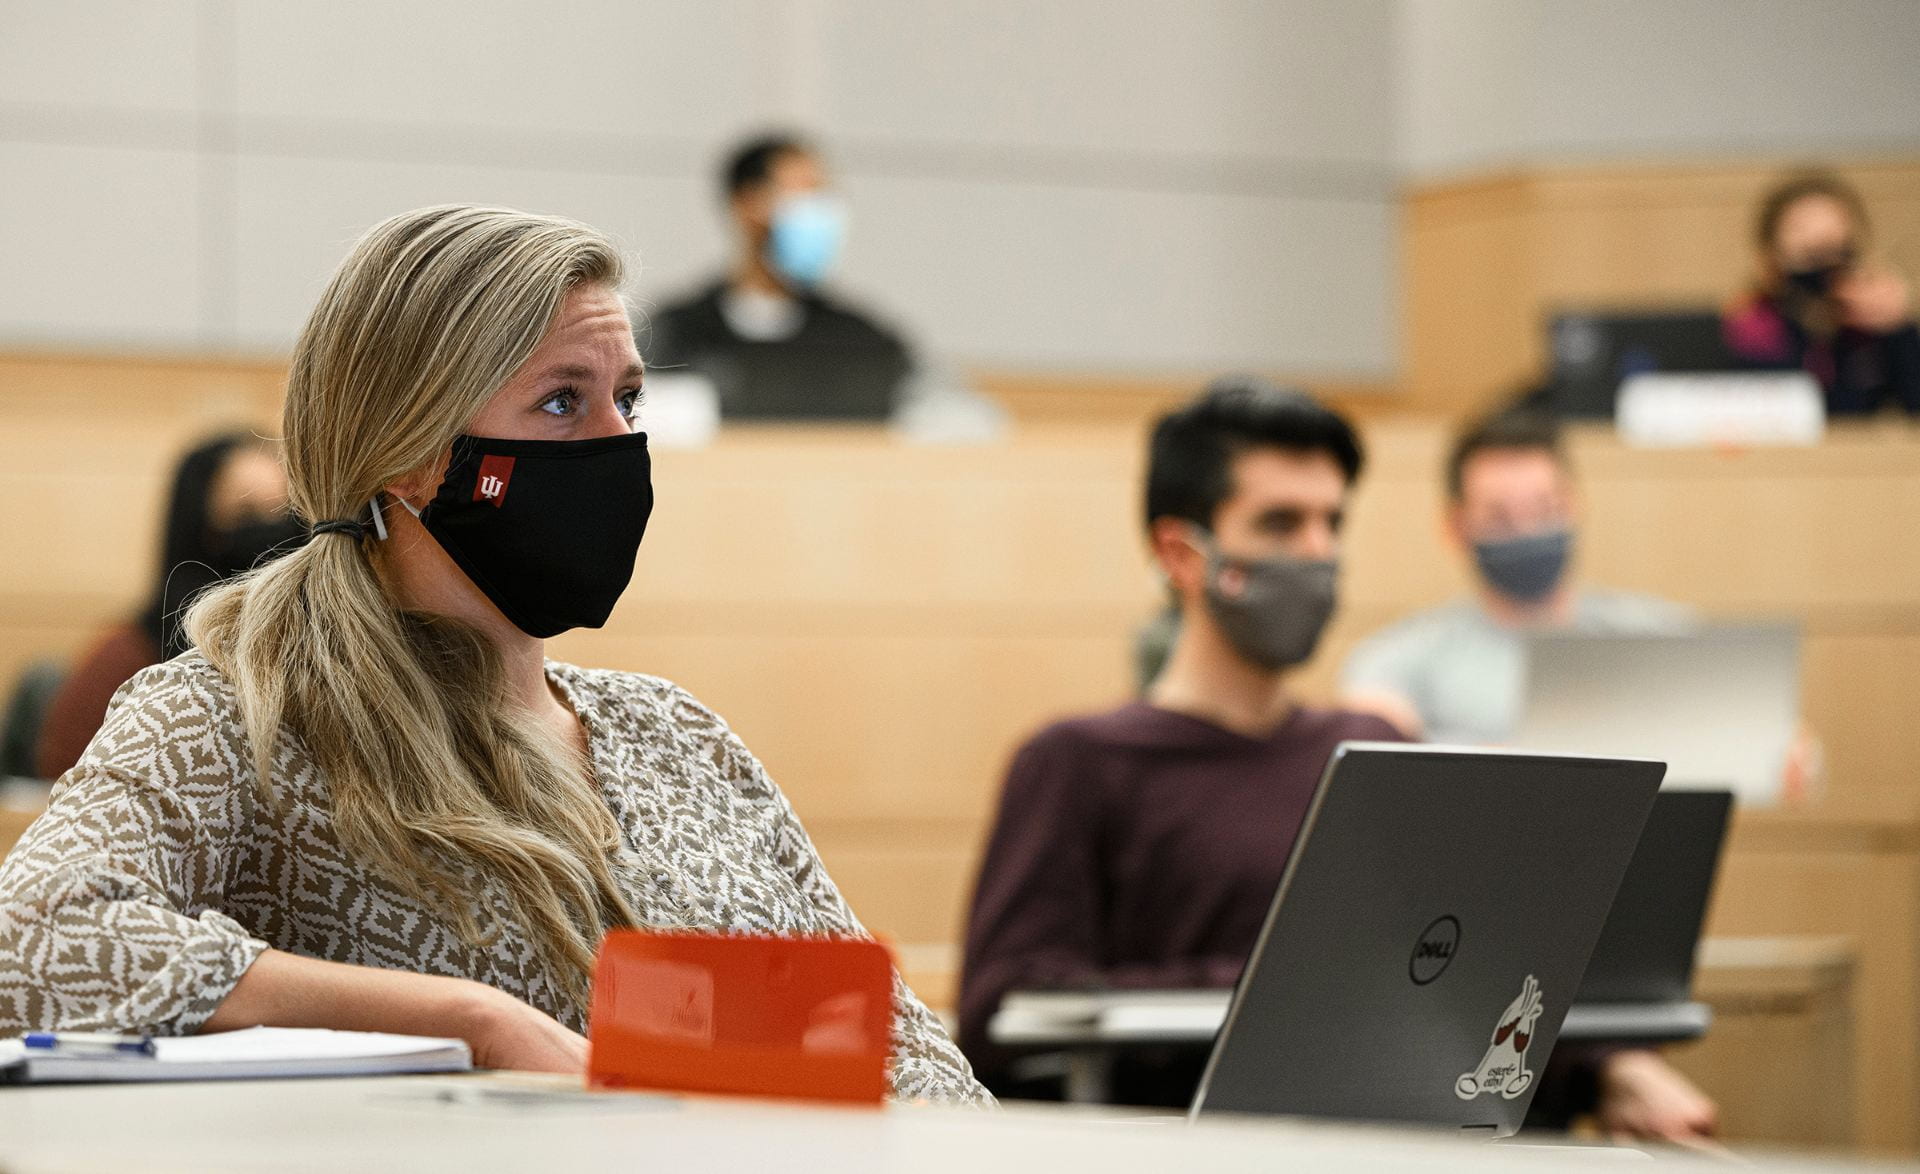 Photos of Full-Time MBA students wearing face masks and social distancing in the classroom were taken on October 6, 2020.